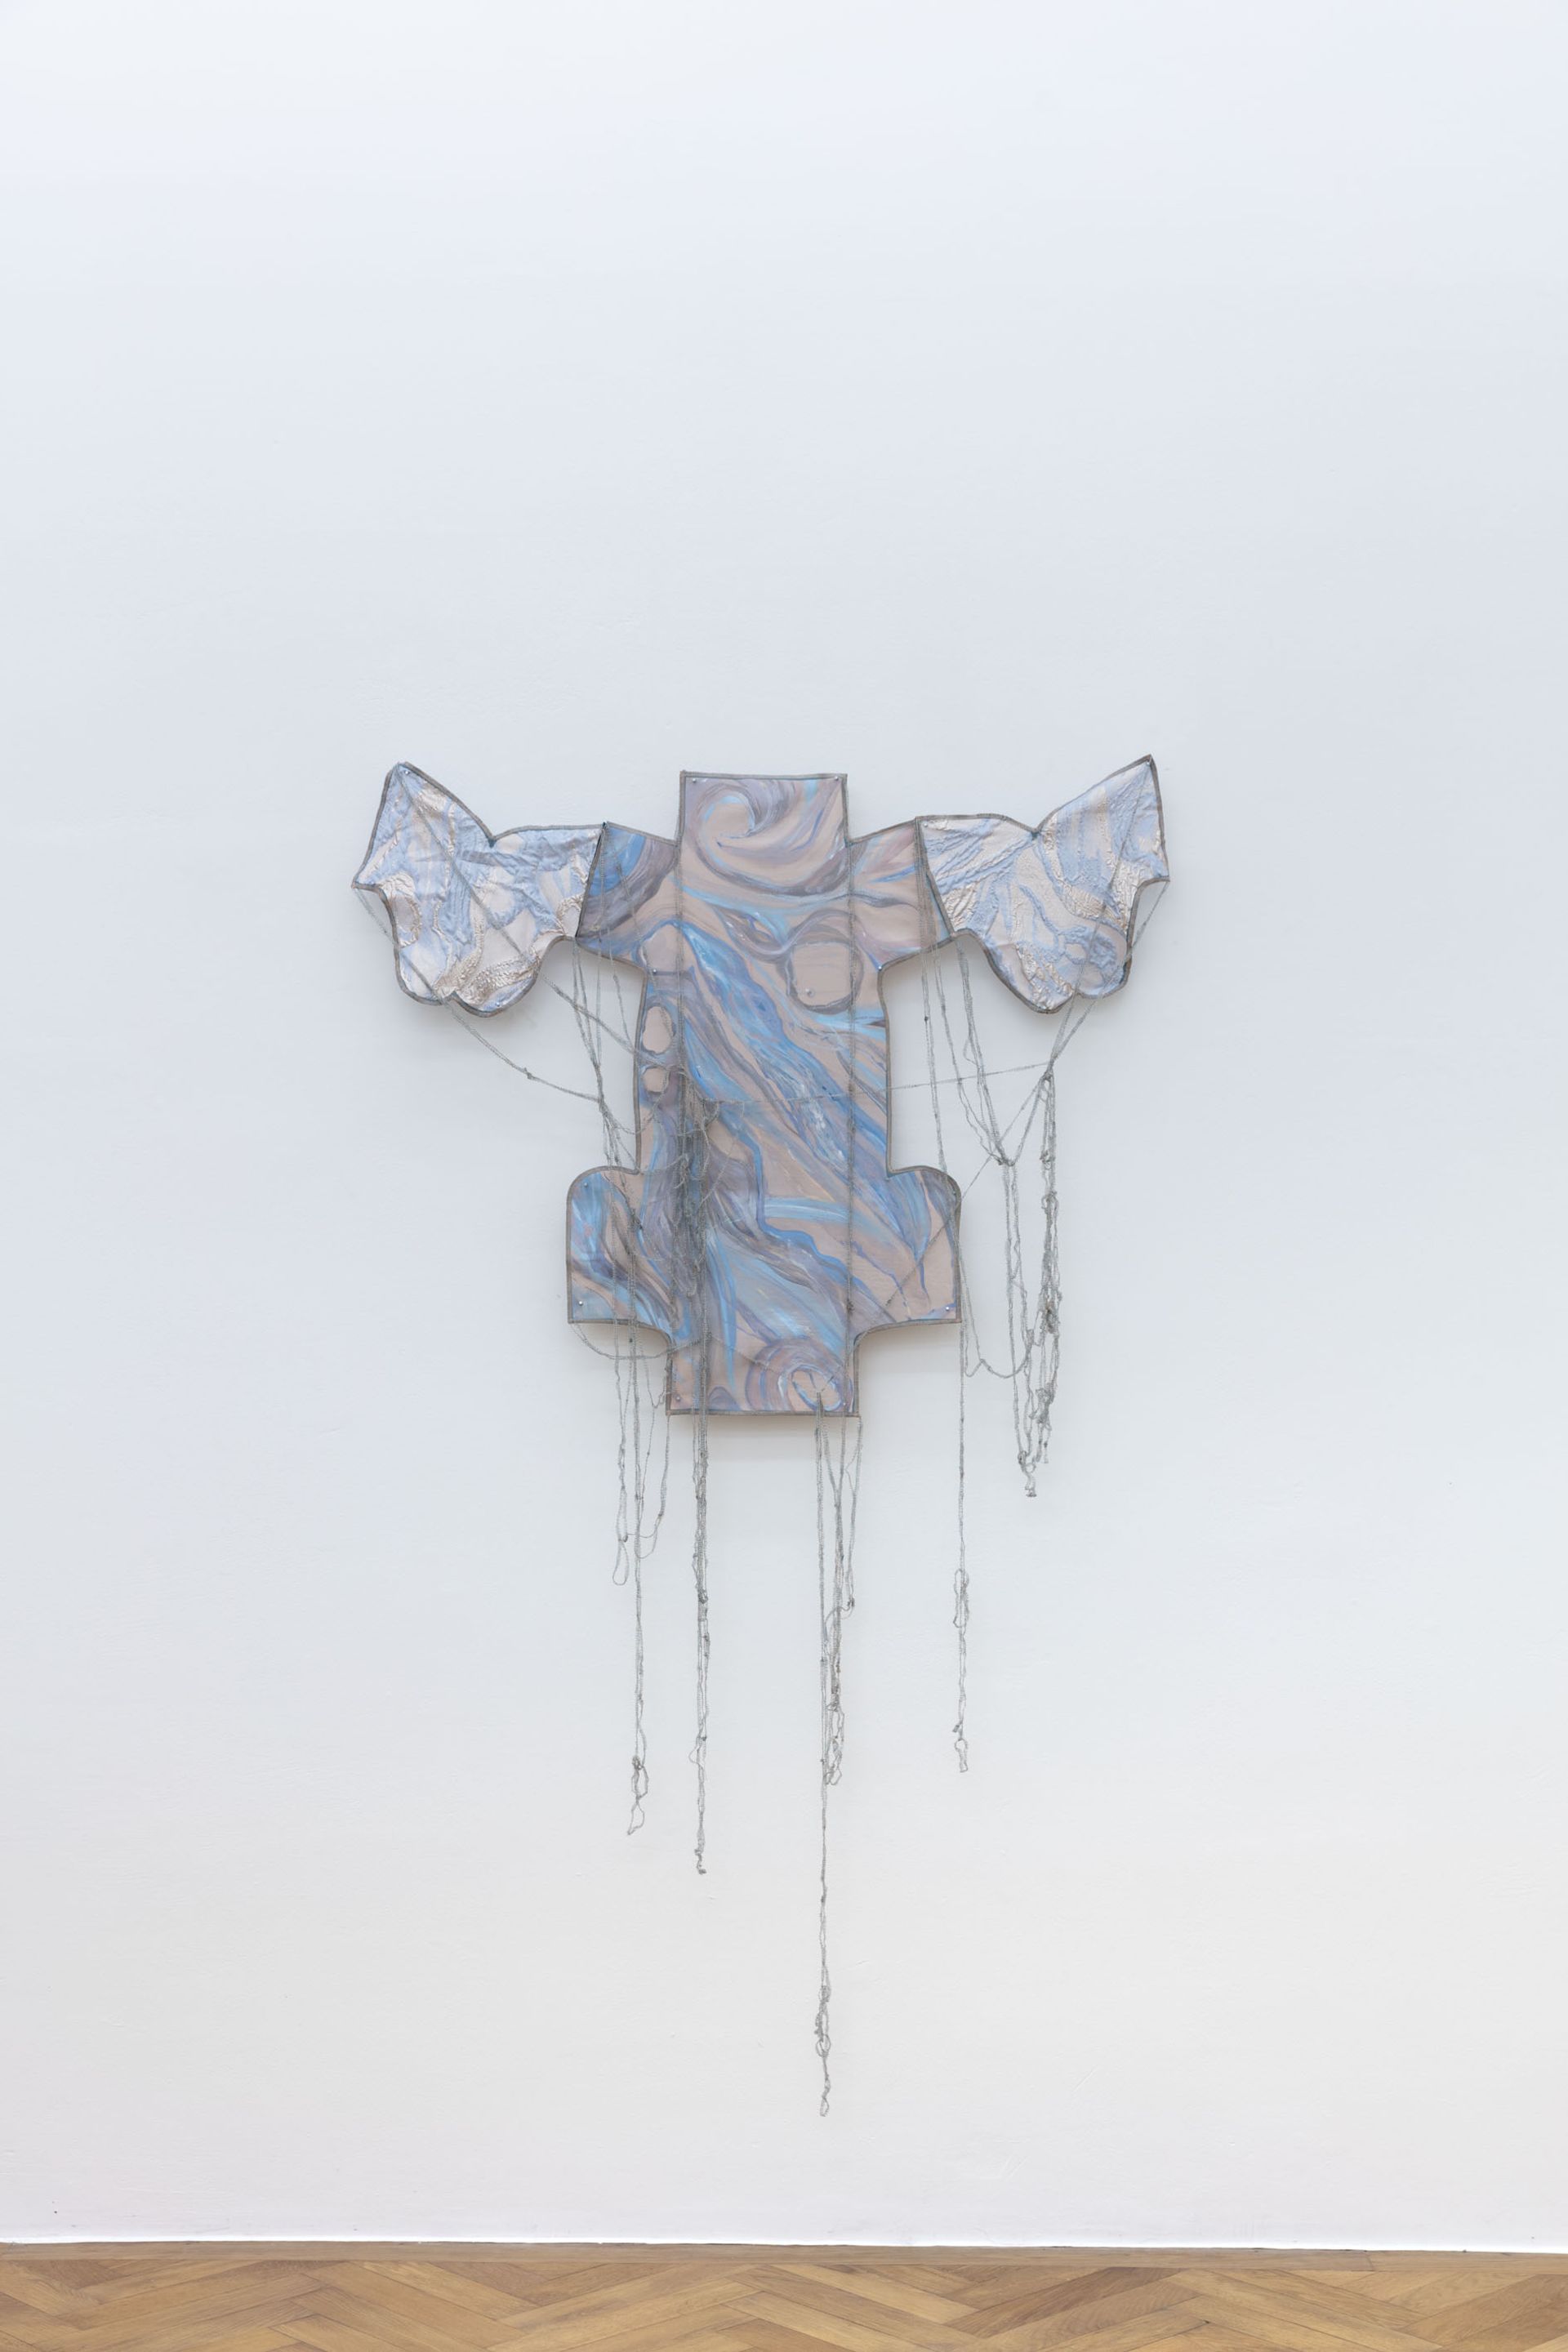 Ana Navas, Poularde auf Silbertablett, 2021, Industrial textiles and copies of the patterns painted by hand, 88 × 115 cm